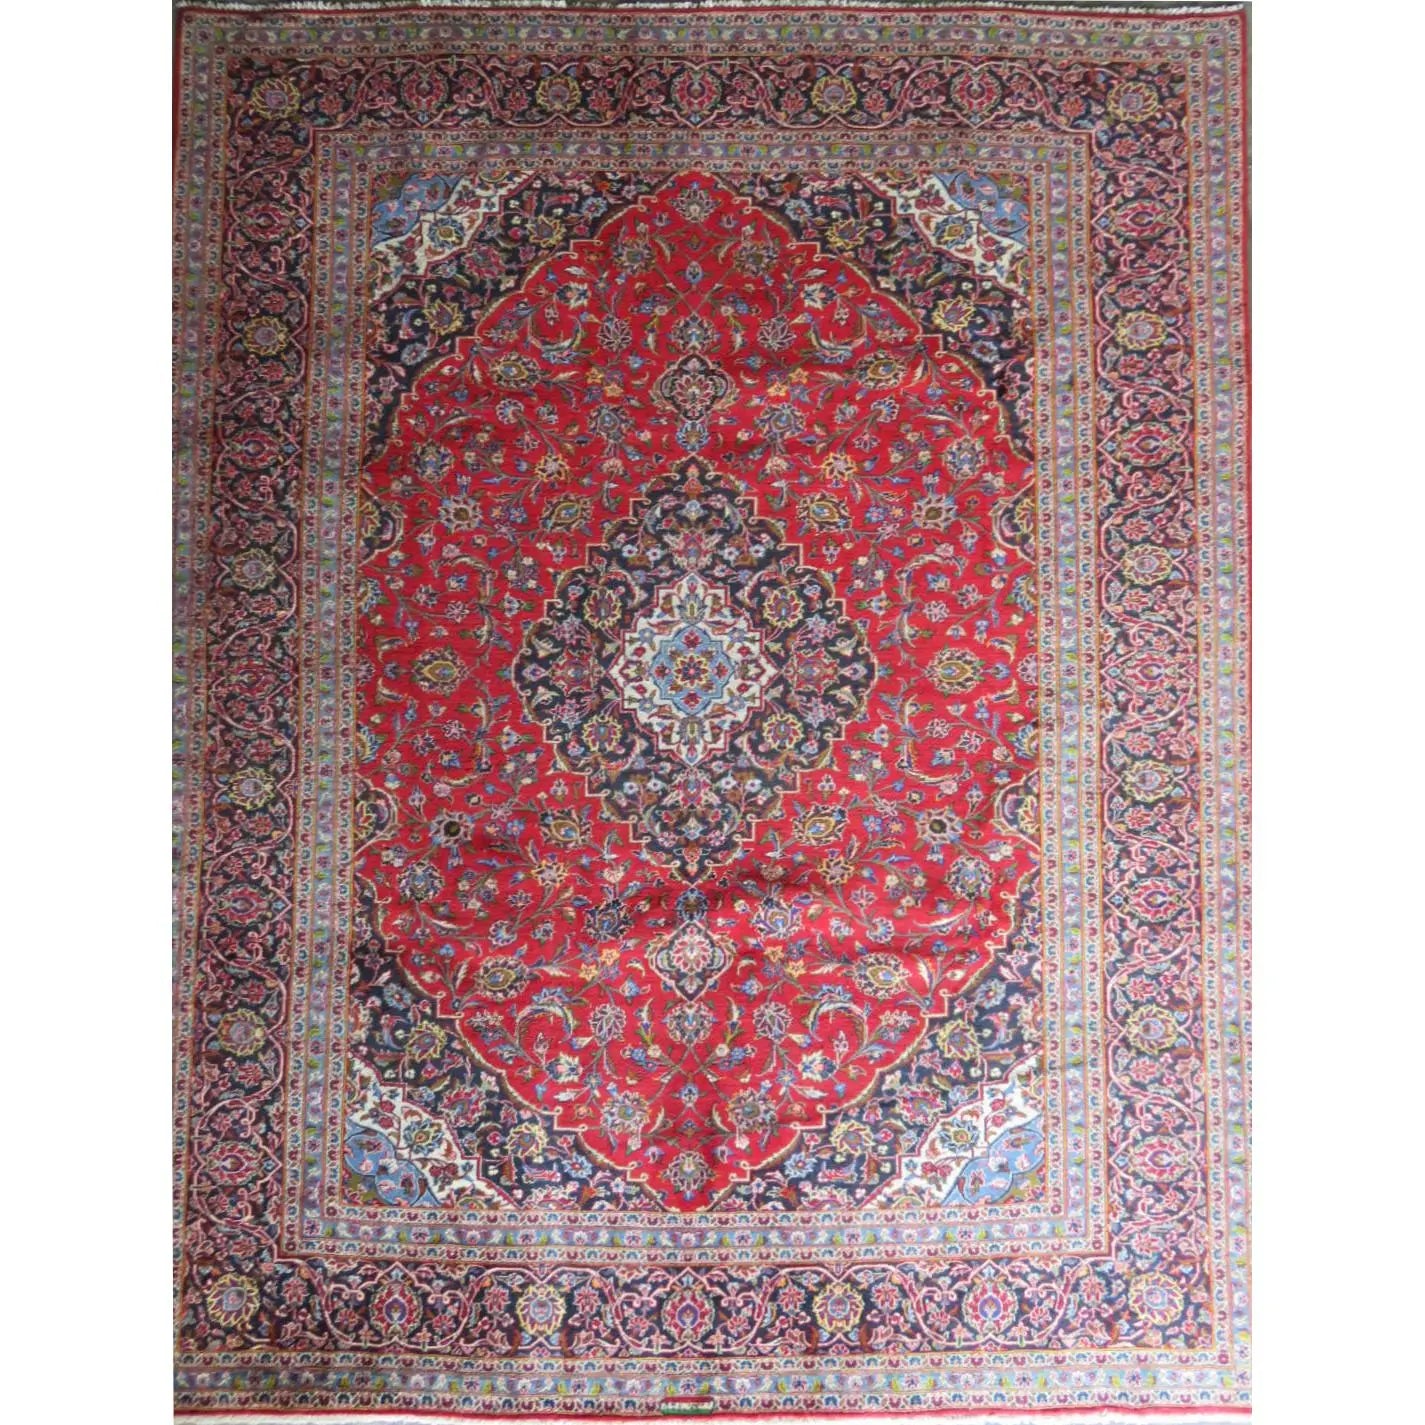 Hand-Knotted Persian Wool Rug _ Luxurious Vintage Design, 12'6" X 9'9", Artisan Crafted